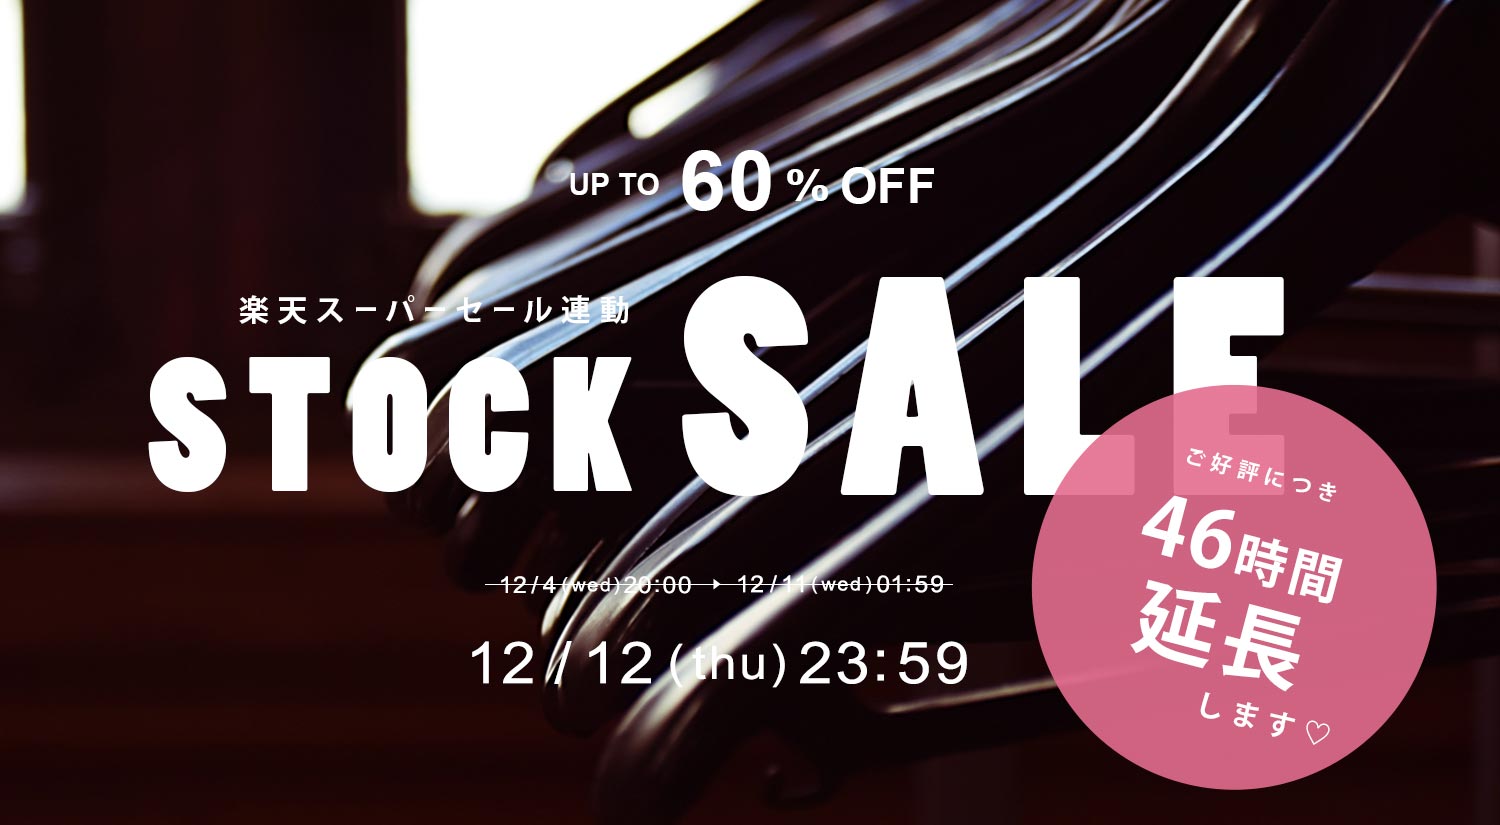 #STOCK SALE #extend the period#event information♡